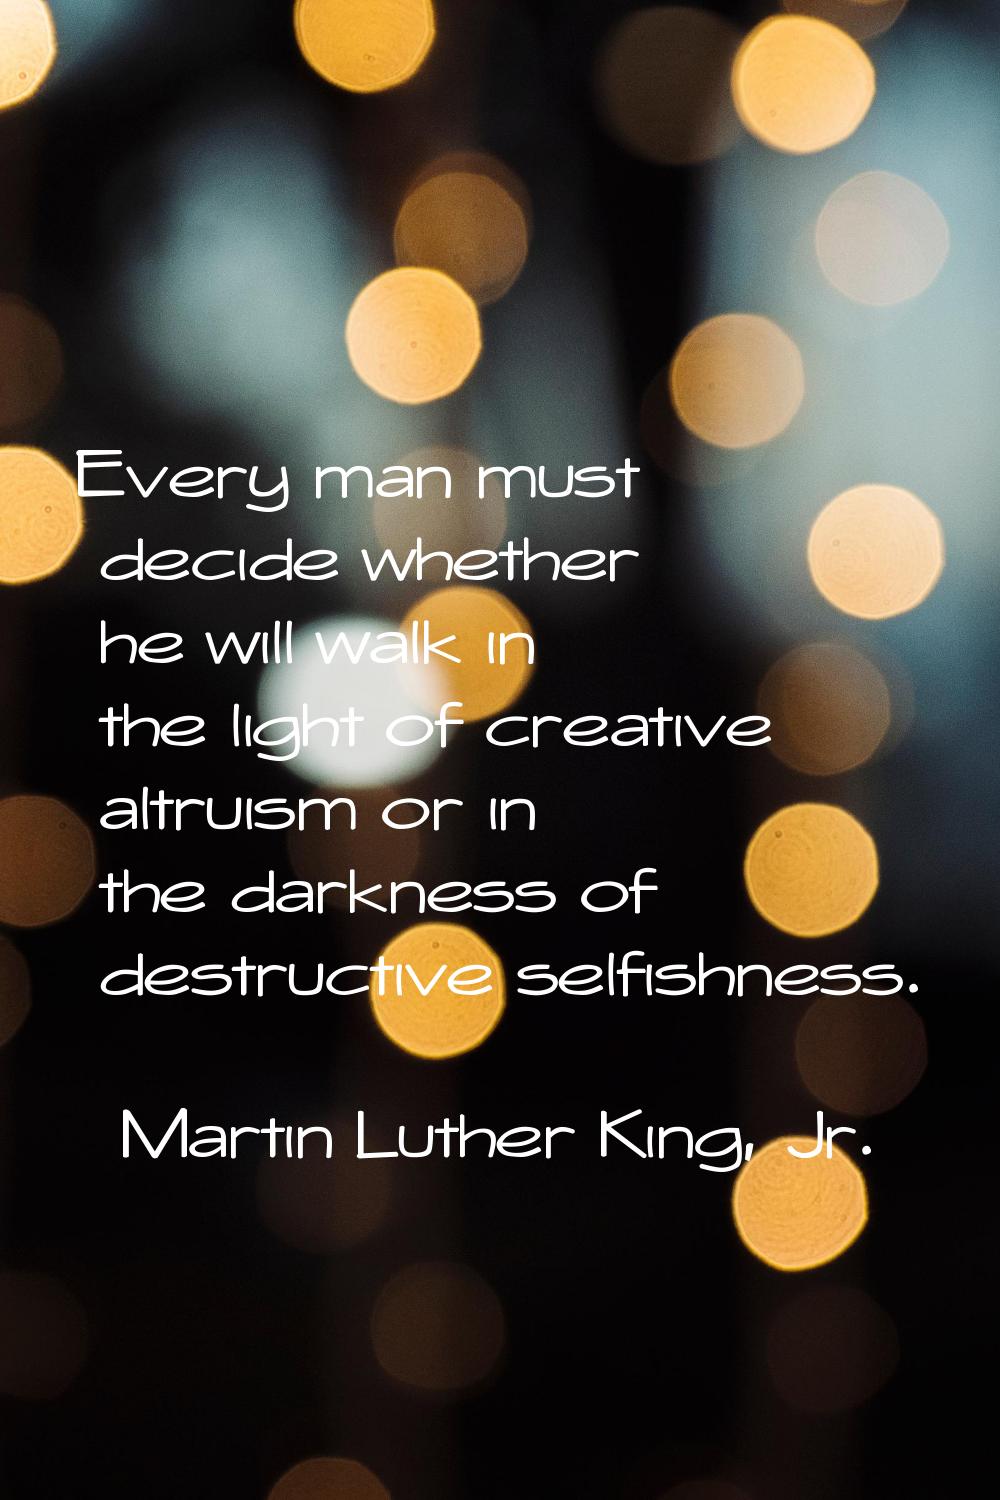 Every man must decide whether he will walk in the light of creative altruism or in the darkness of 